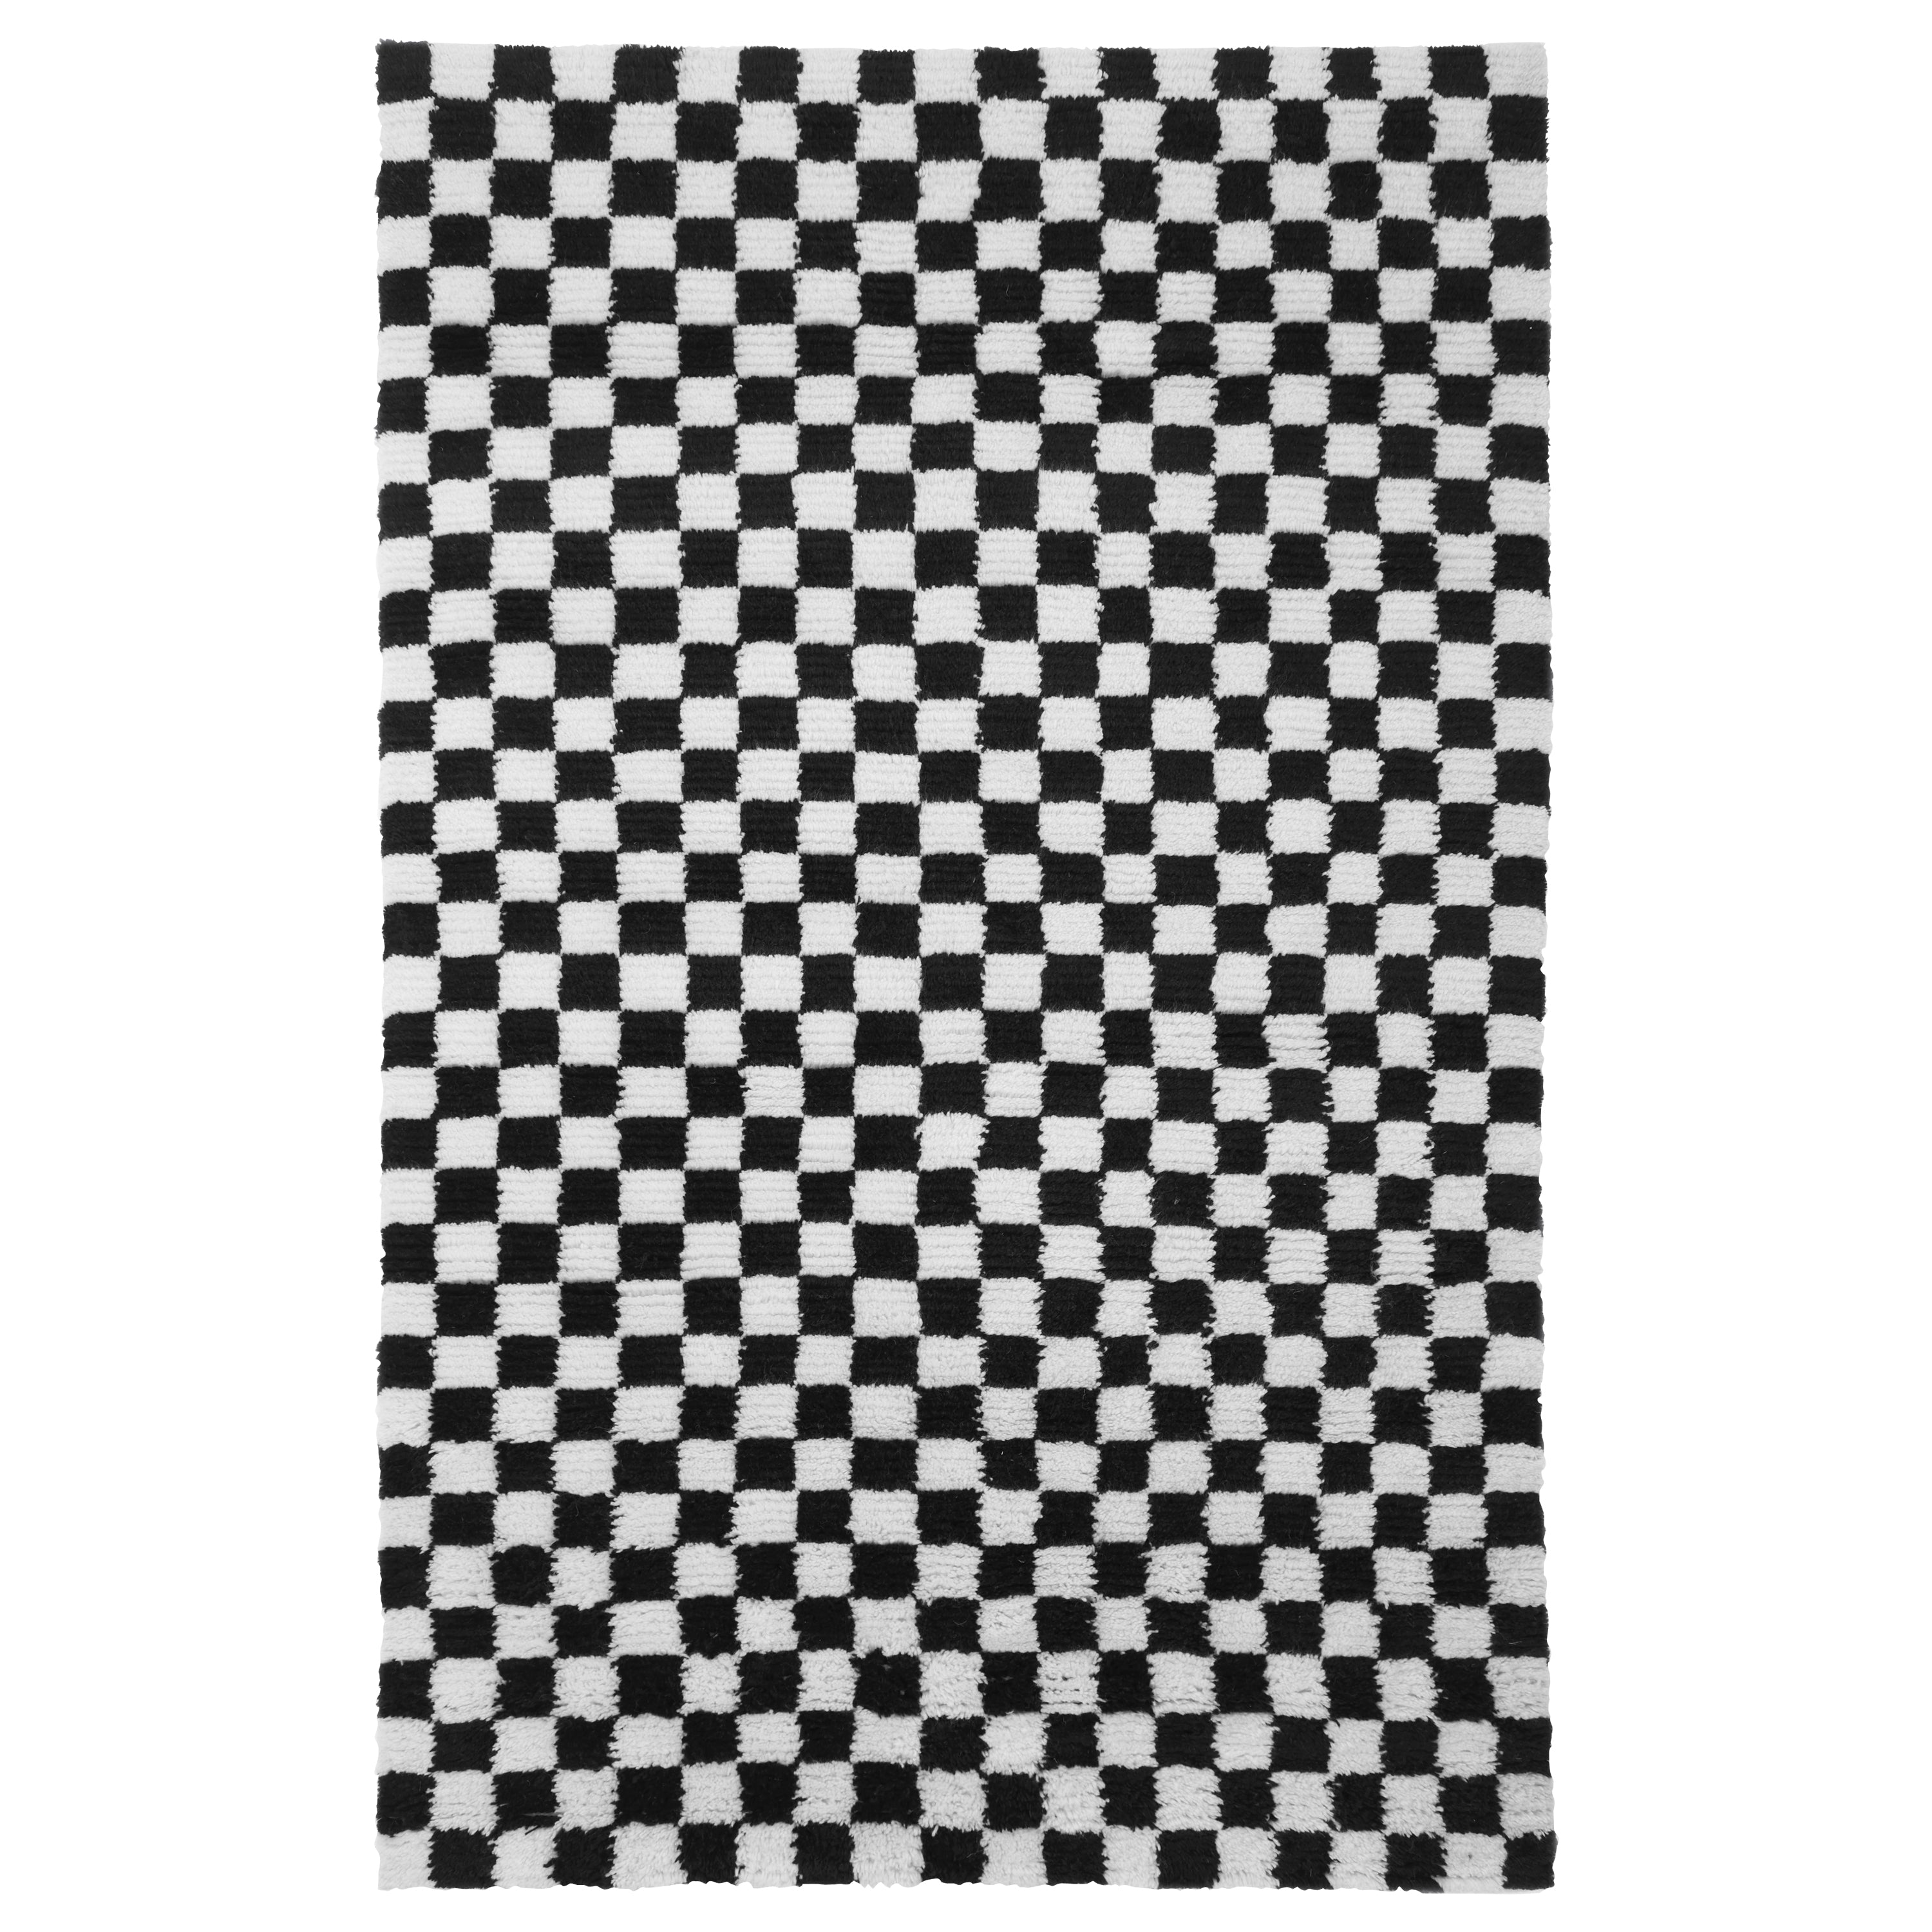 Black and White Contemporary Wool Cotton Blend Rug